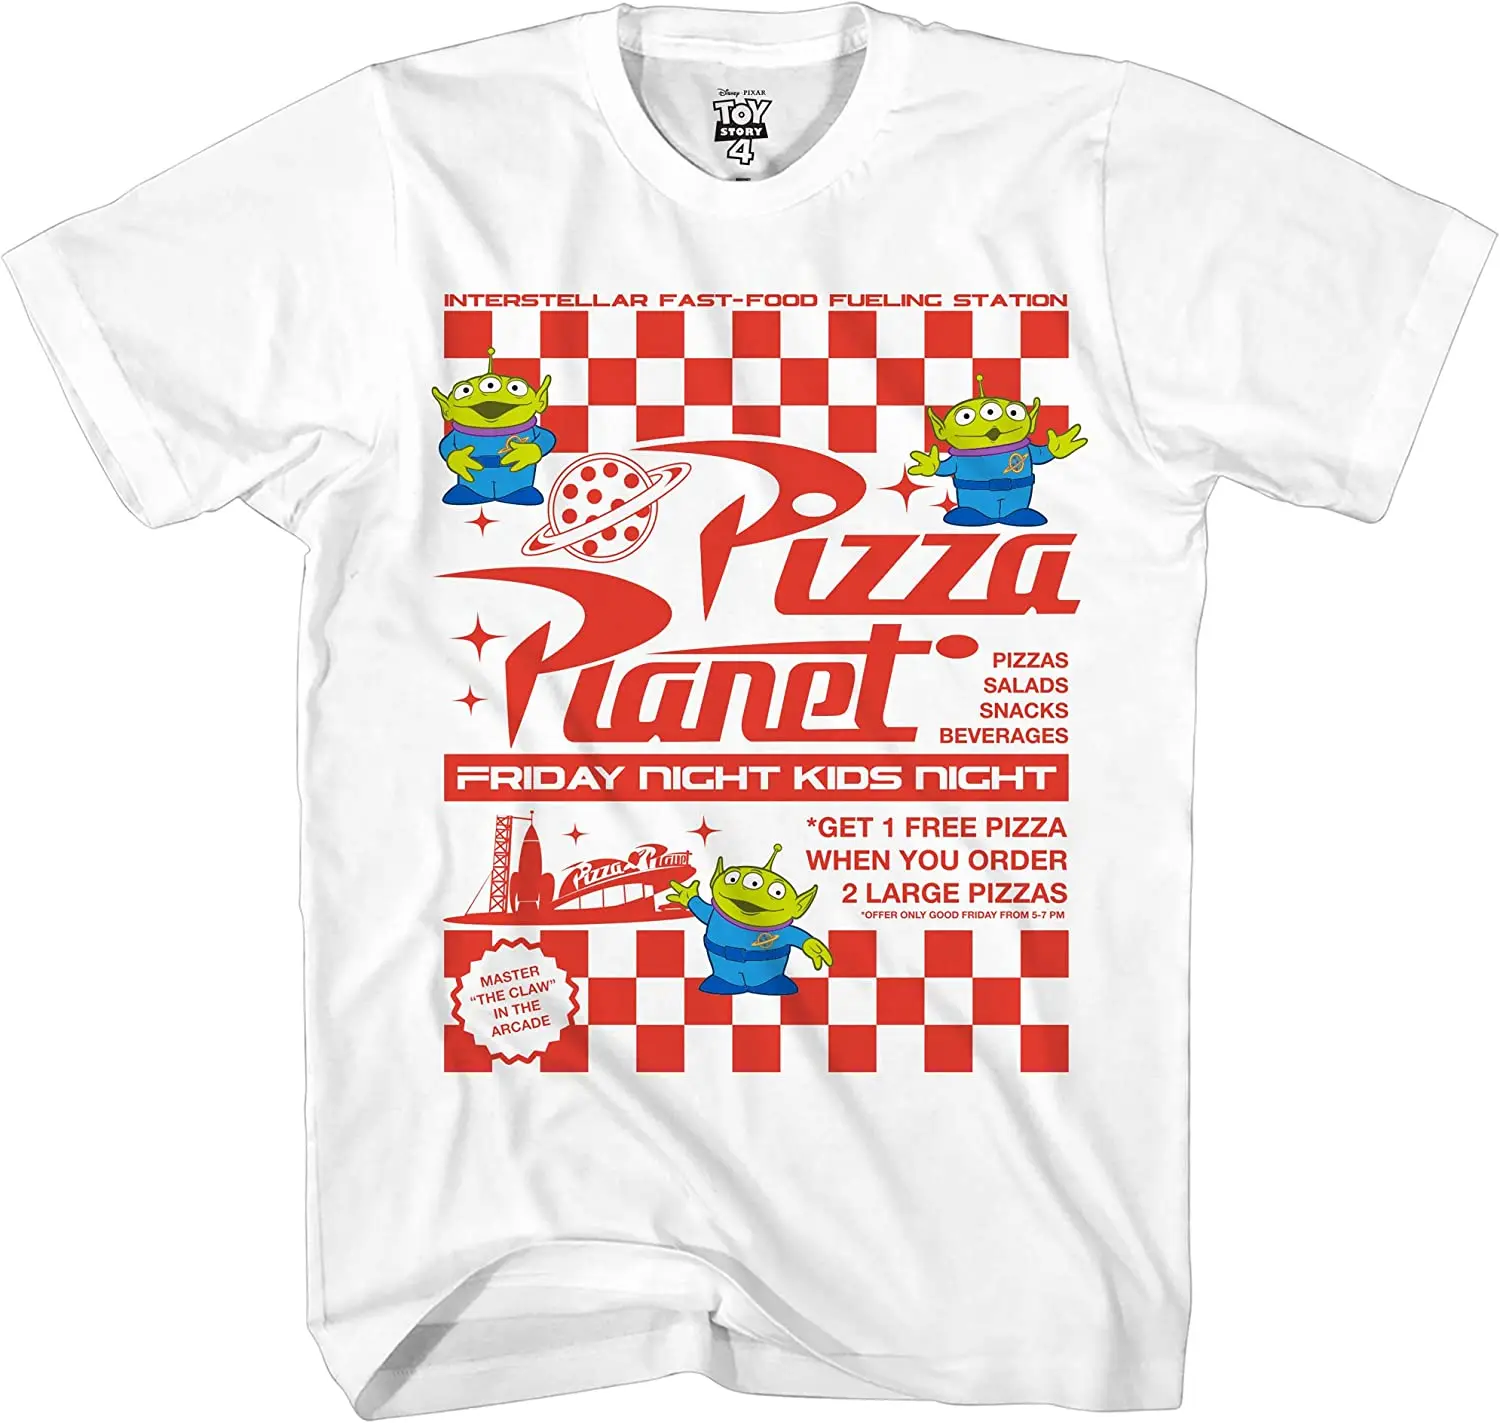 

Disney Pixar Toy Story Pizza Planet Take Out Flyer Disney World T-shirt Funny and Humorous Men's Graphic T-shirt